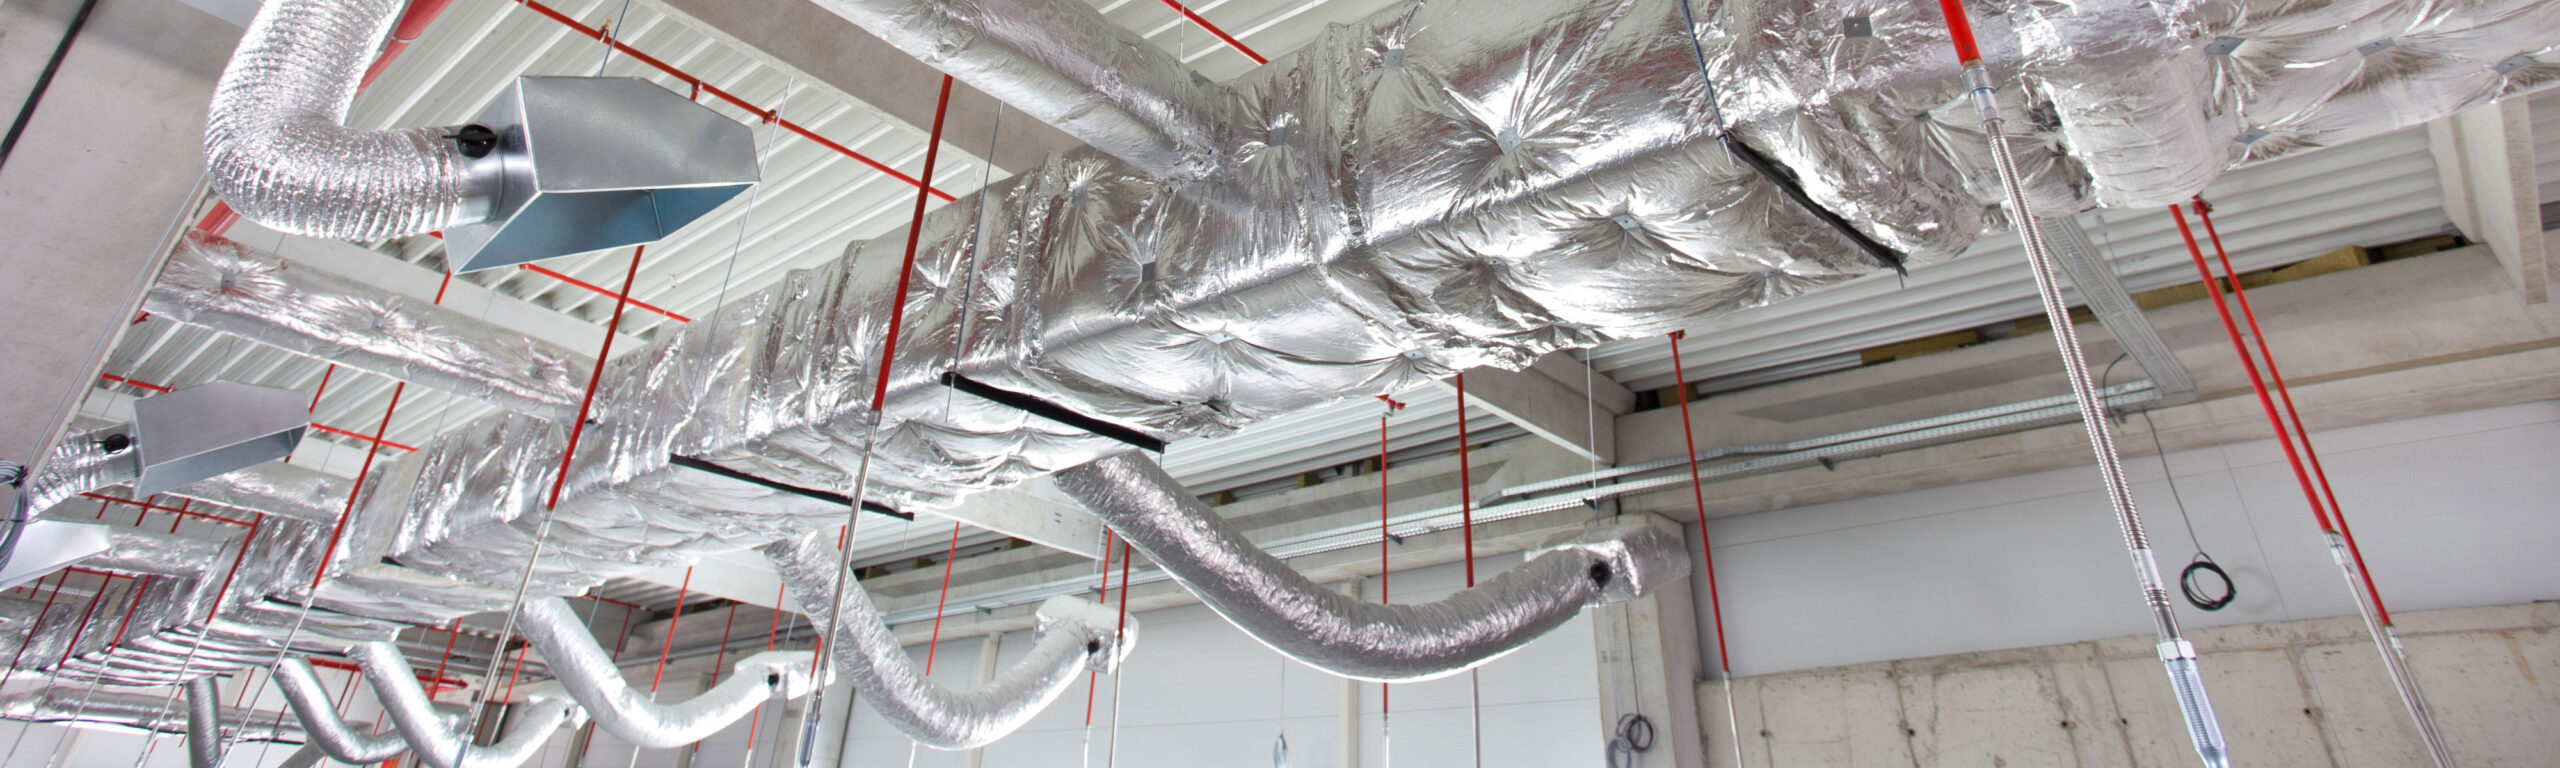 fairfield air duct cleaning